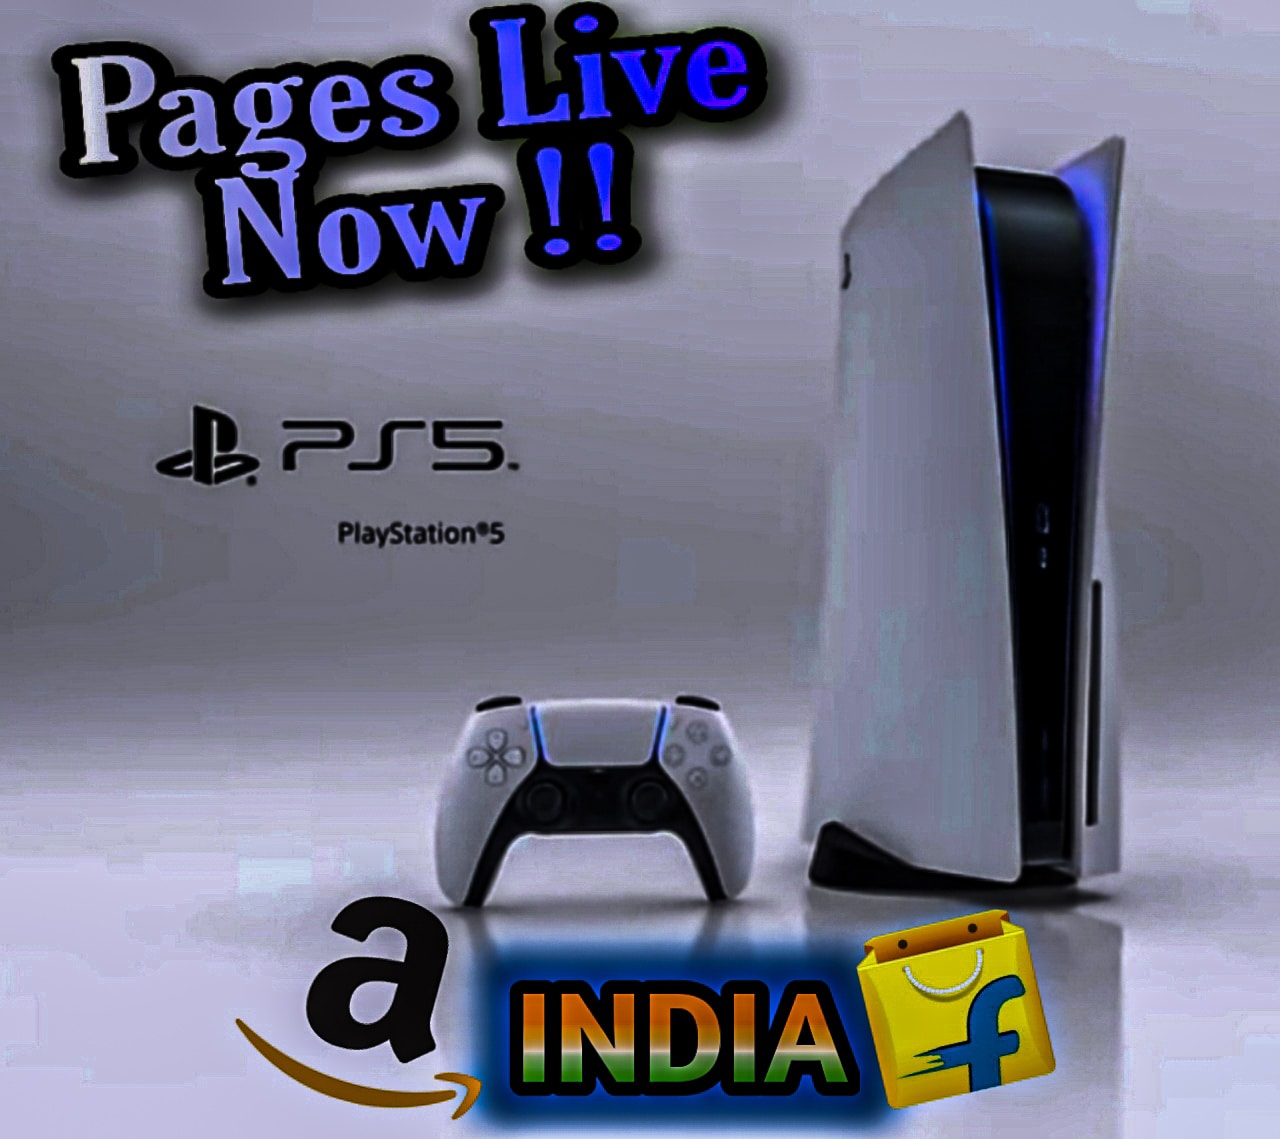 Playstation 5 Pages Live on Amazon And Flipkart India